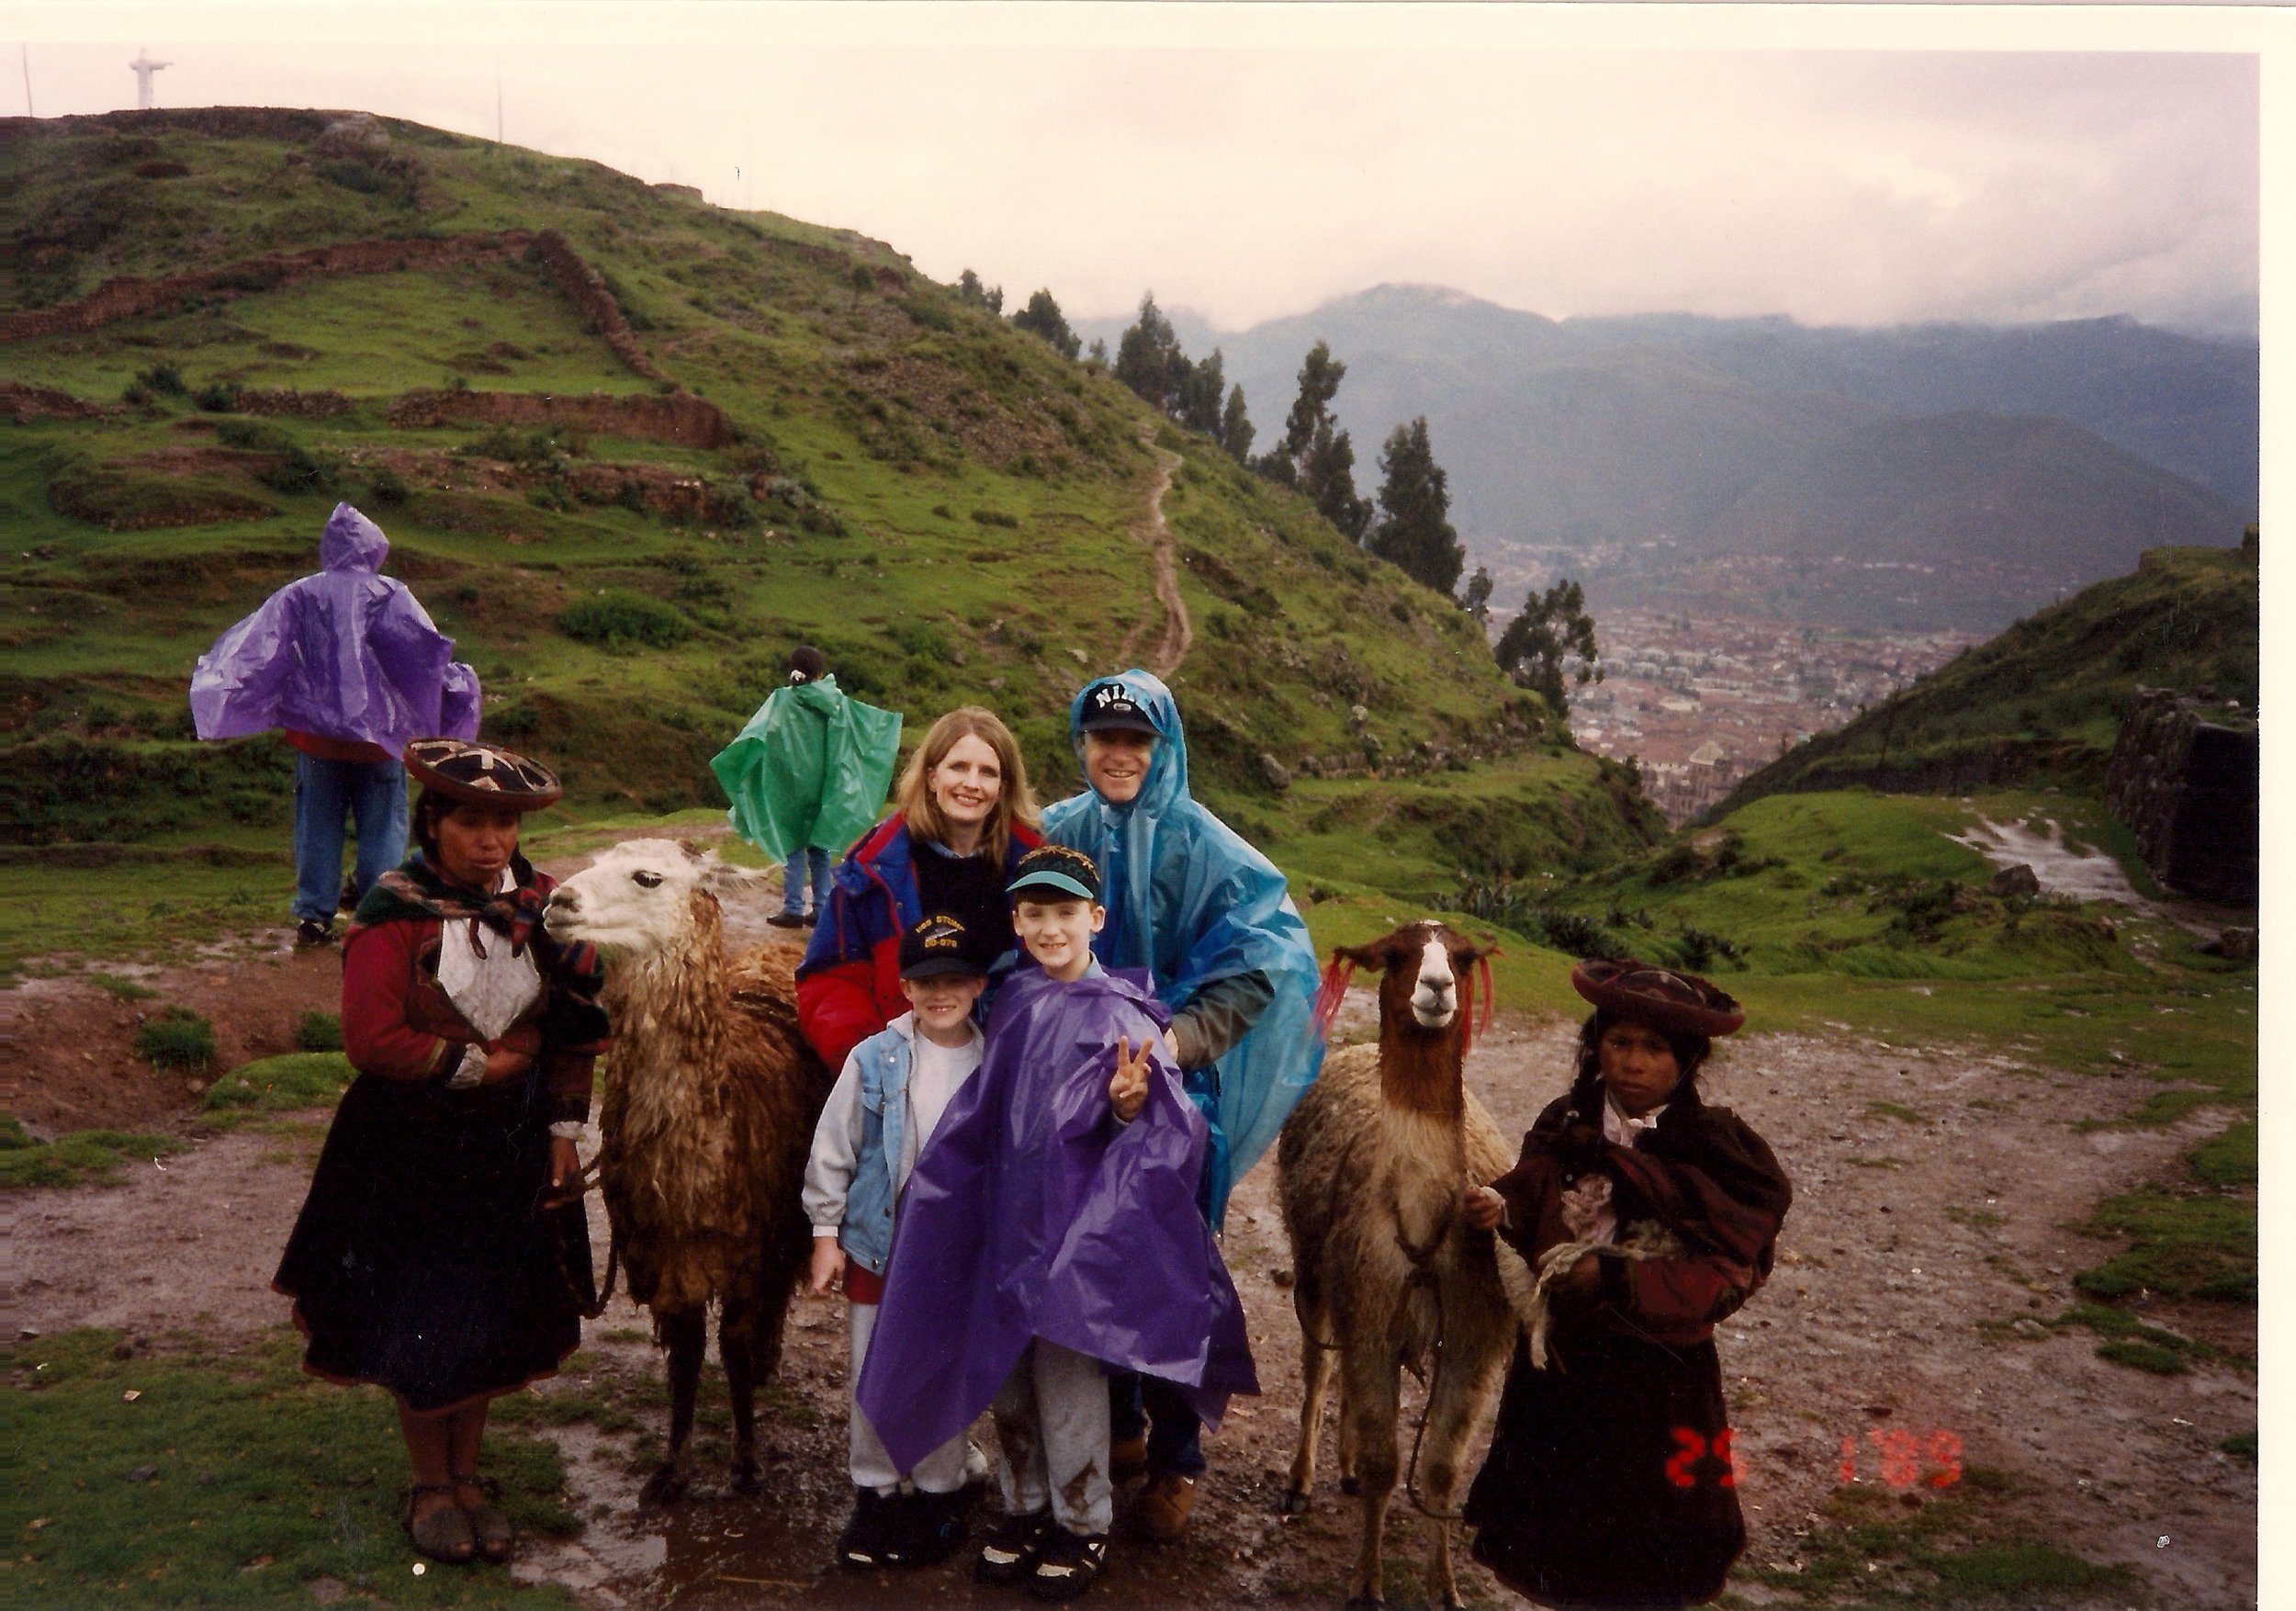 1996_06 Cuzco city-wide Christian Concert for 800 people.jpg